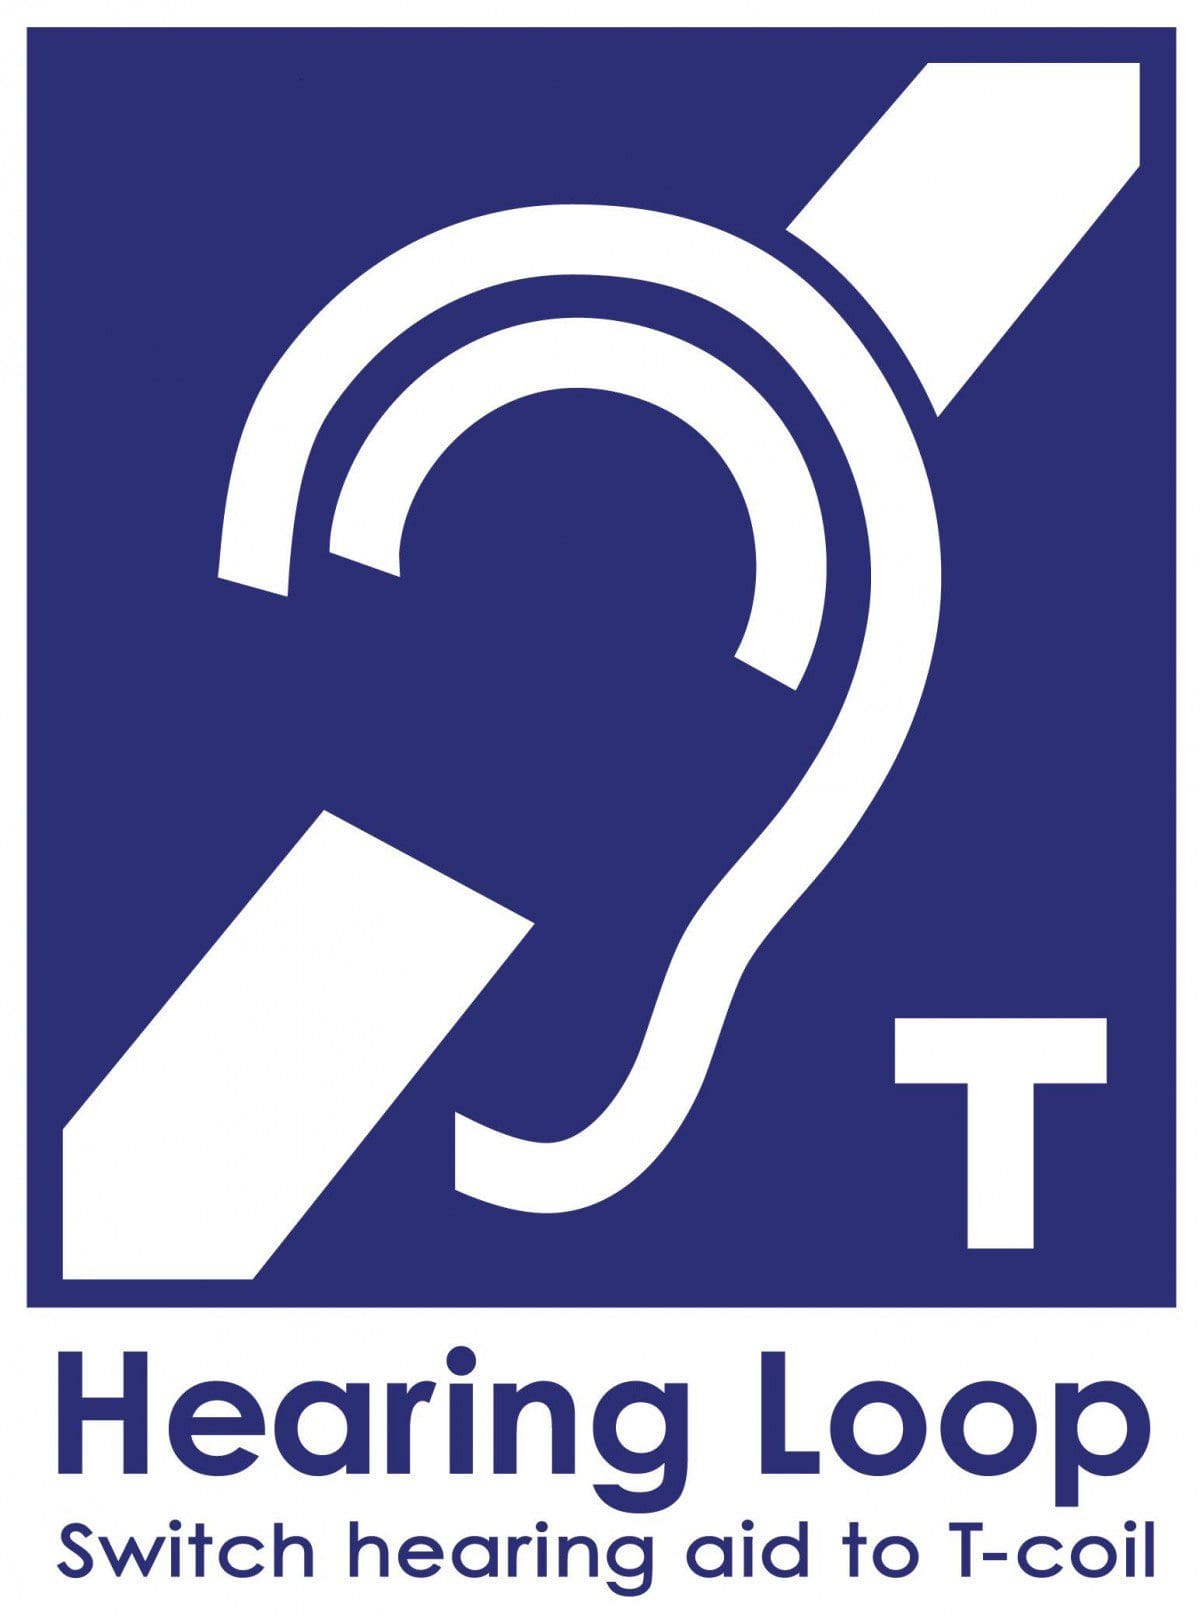 Is Your Hearing Aid T-Coil Compatible?